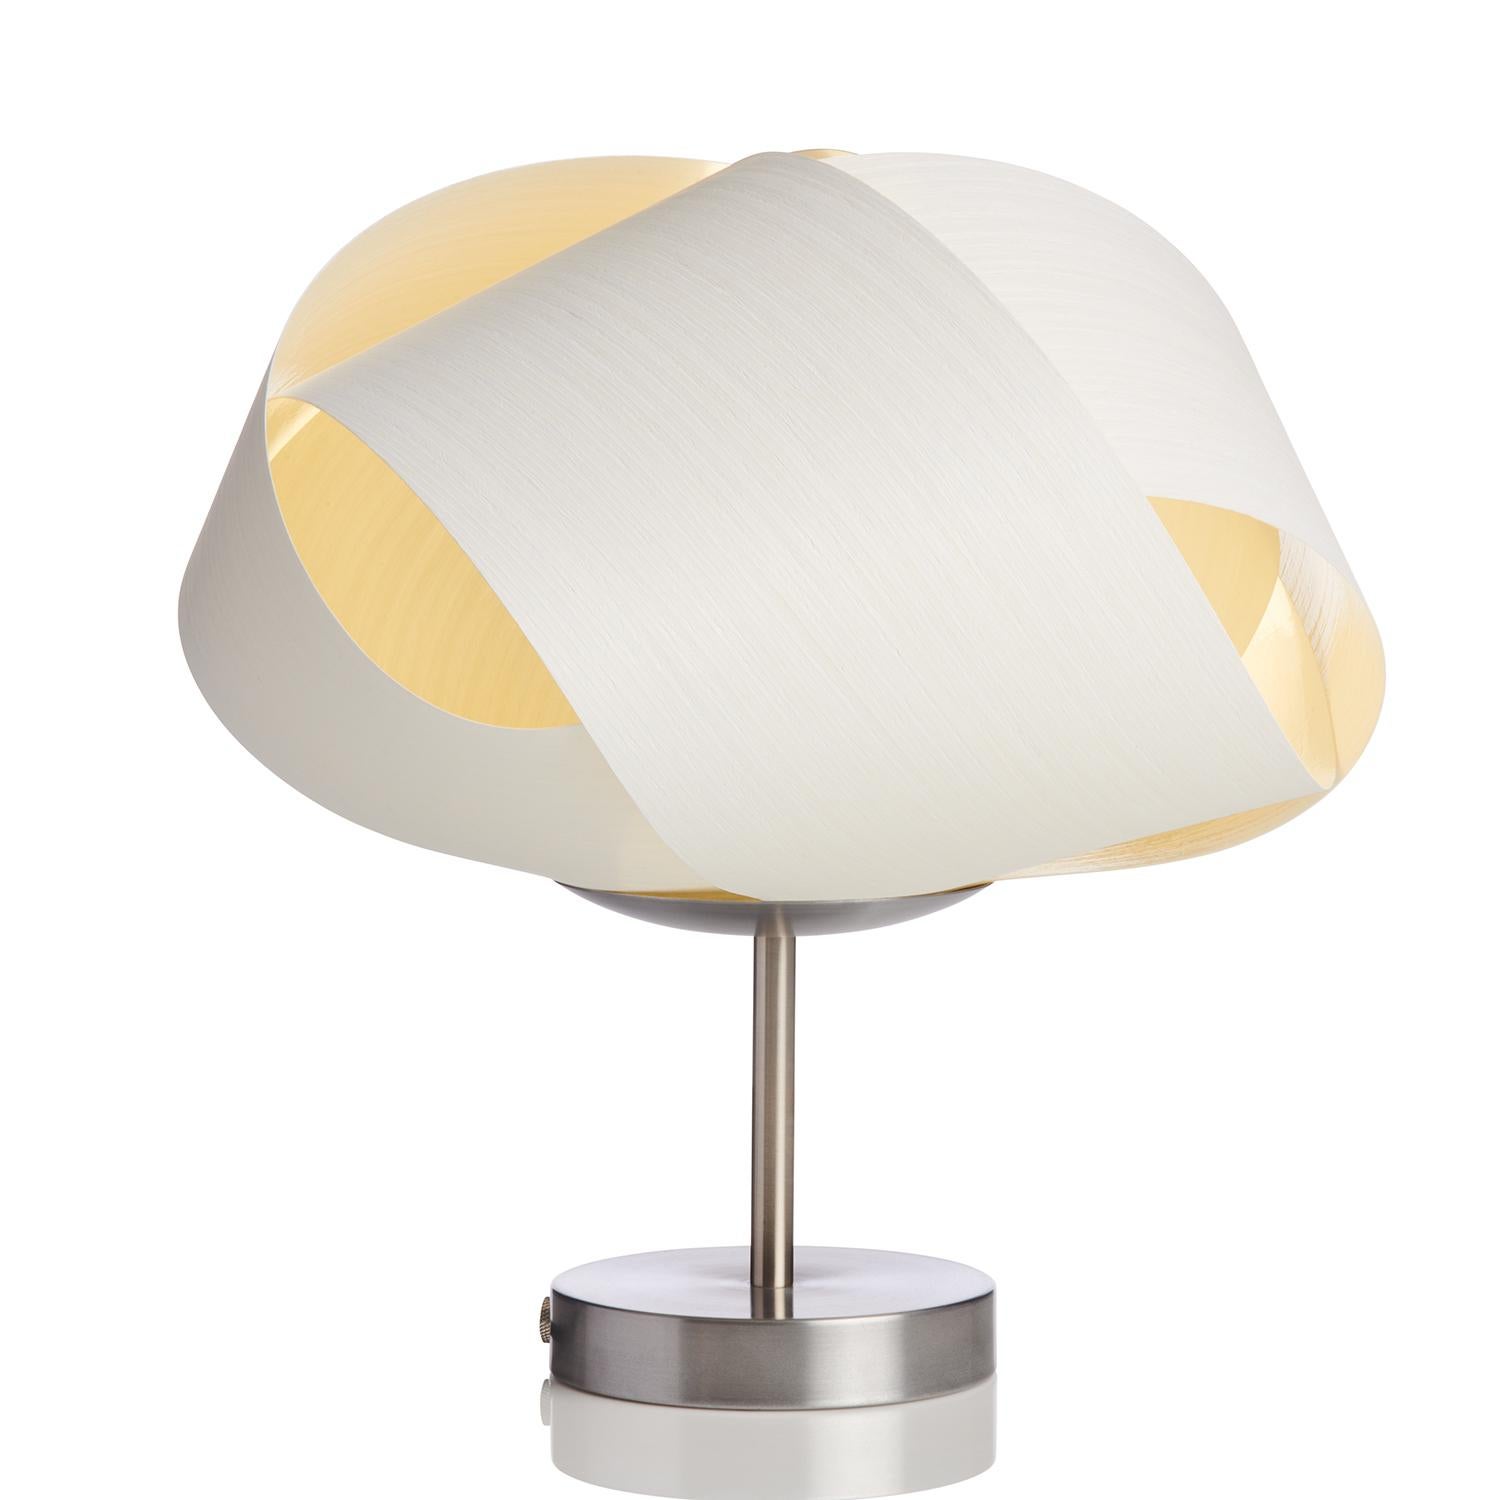 FLEUR is a Danish Modern wood veneer side light. This small contemporary table lamp can be used as a luxury piece for a bar, side table, alcove, or as bedside lighting. This Organic, Scandinavian Design is customized with several wood veneer